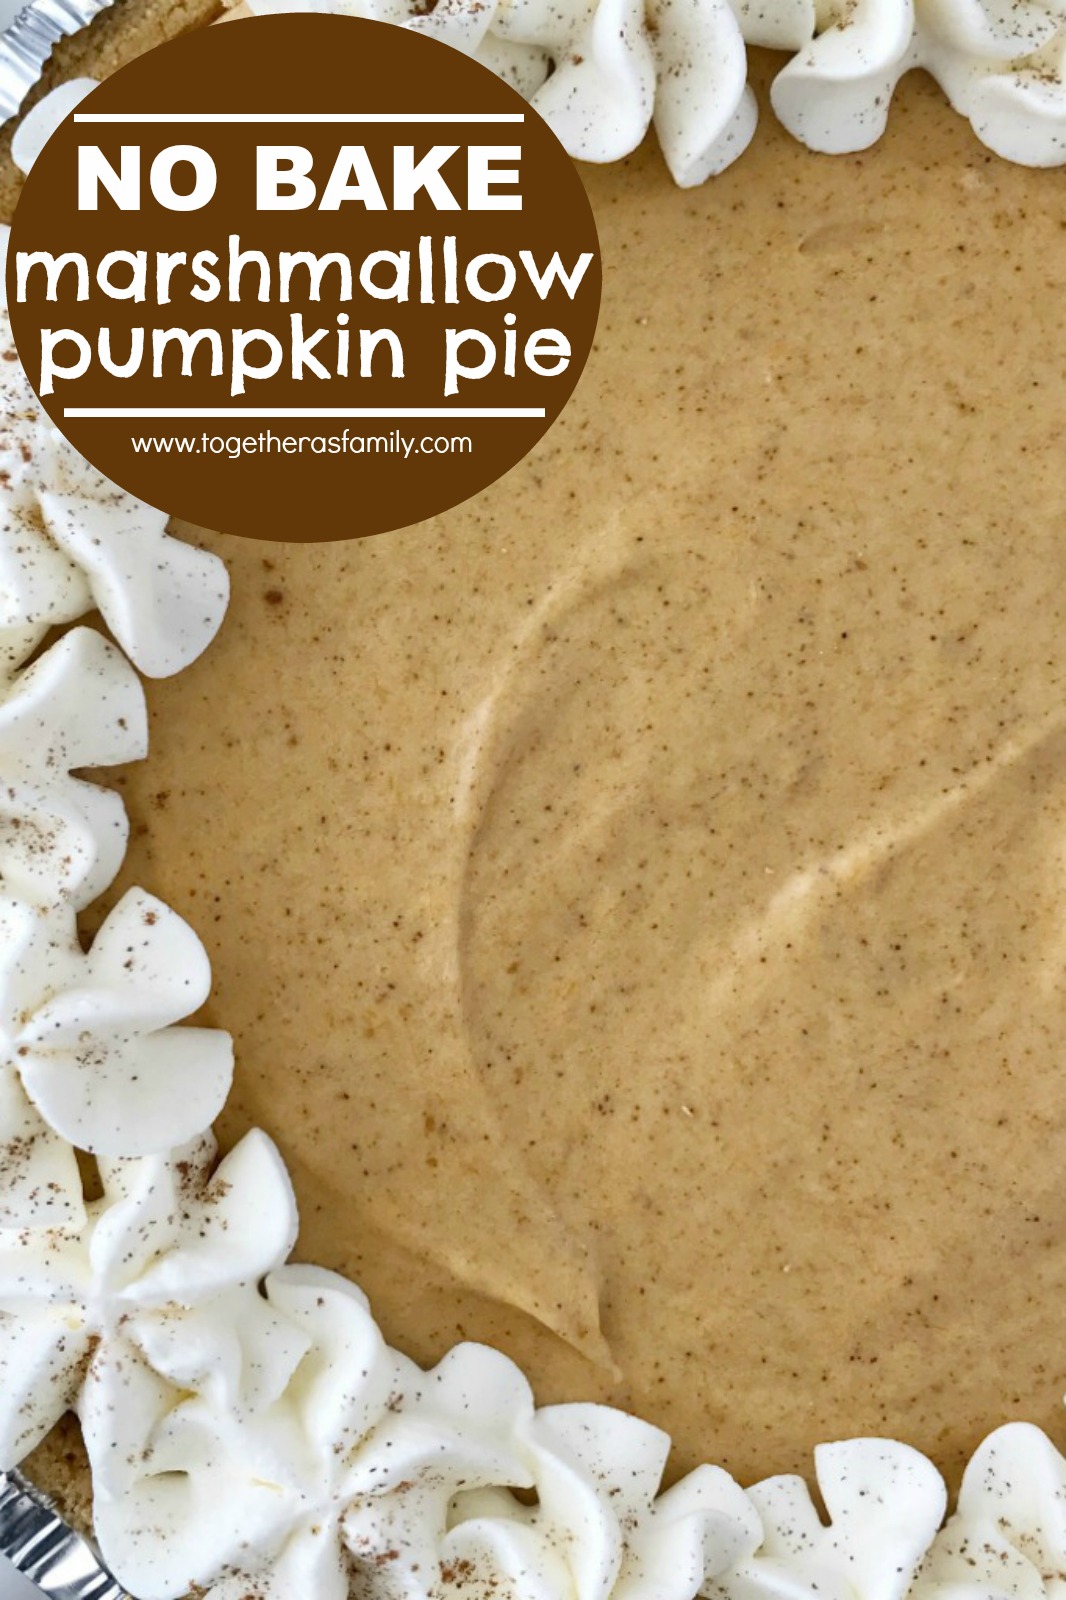 No Bake Marshmallow Pumpkin Pie | No Bake Pumpkin Pie | Pumpkin Recipes | No bake pumpkin pie with marshmallows is a sweet and creamy twist to classic pumpkin pie. Marshmallow, Cool whip, and pumpkin combine to make a delicious pumpkin pie in a store-bought graham cracker crust. #pumpkin #pumpkinrecipes #pumpkinpie #nobakerecipes #nobakedesserts #fallbaking